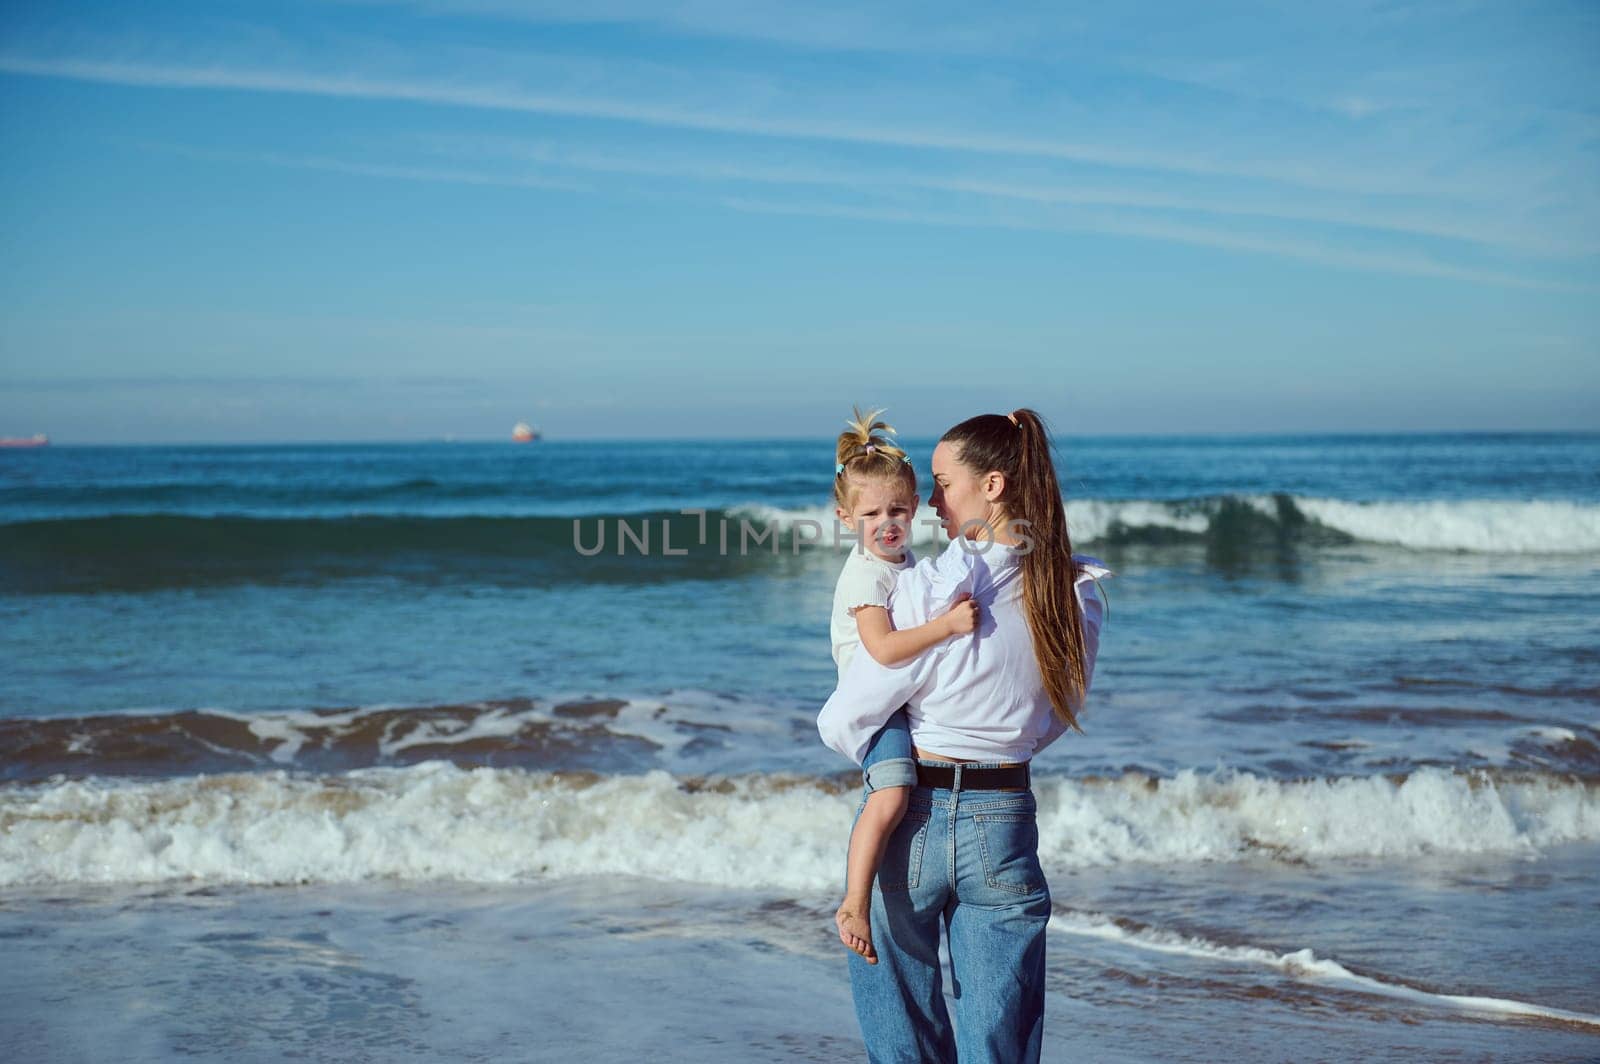 A beautiful young mother in white casual shirt and blue jeans, carries her baby in her arms, an adorable little girl, walking together barefoot on the beach. Mom and daughter. People and nature